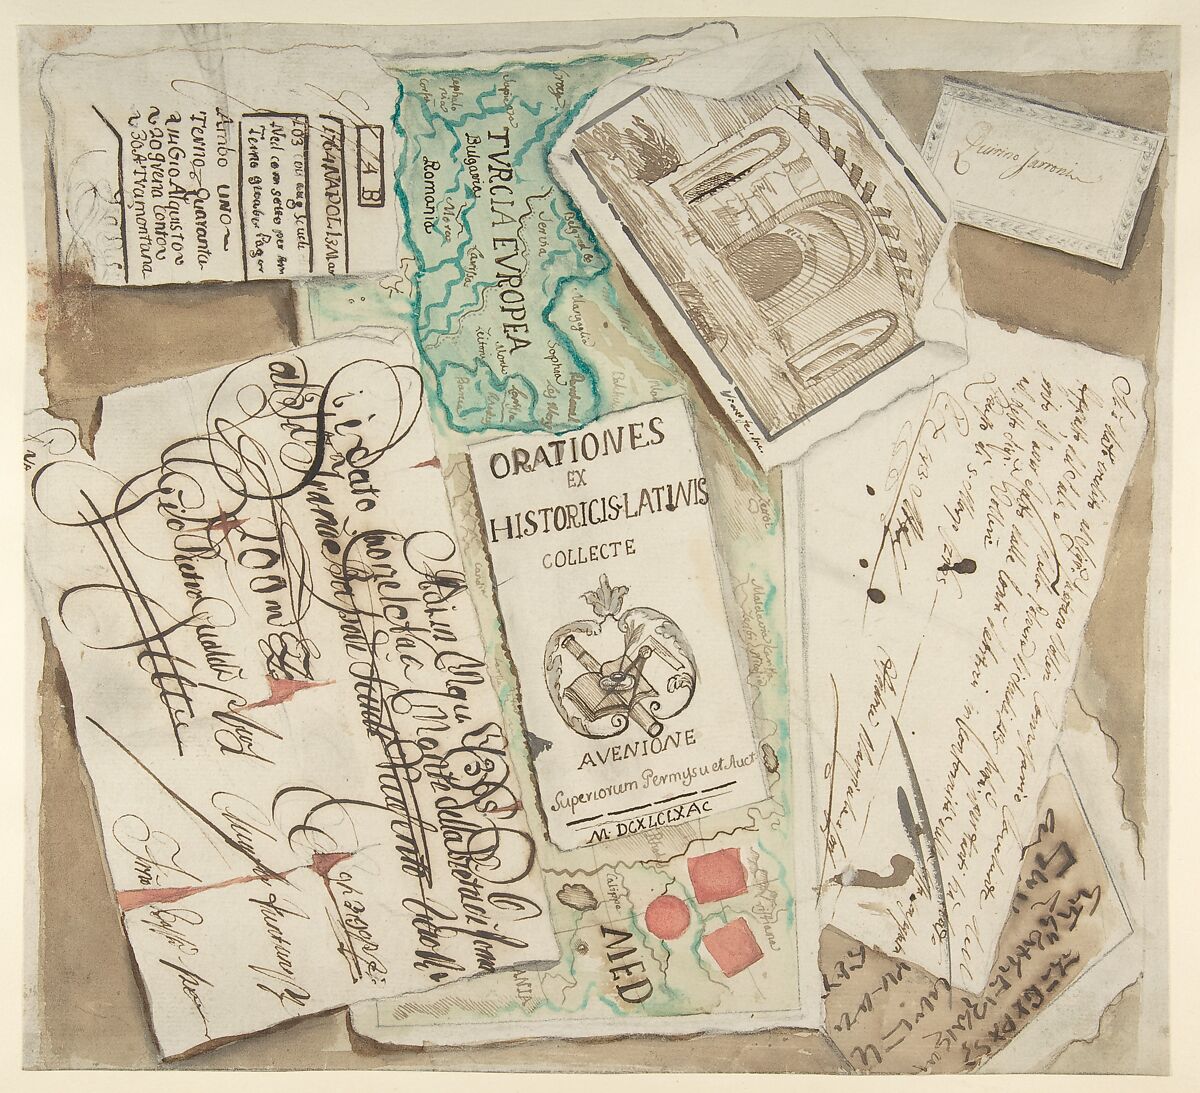 Trompe l'Oeil Design Including Bills, Calling Cards, an Etching, a Map etc., Giovanni Larciani ("Master of the Kress Landscapes") (Italian, 1484–1527), Pen and brown ink, brush with brown, red, green, and gray wash, over black chalk on cream laid paper 